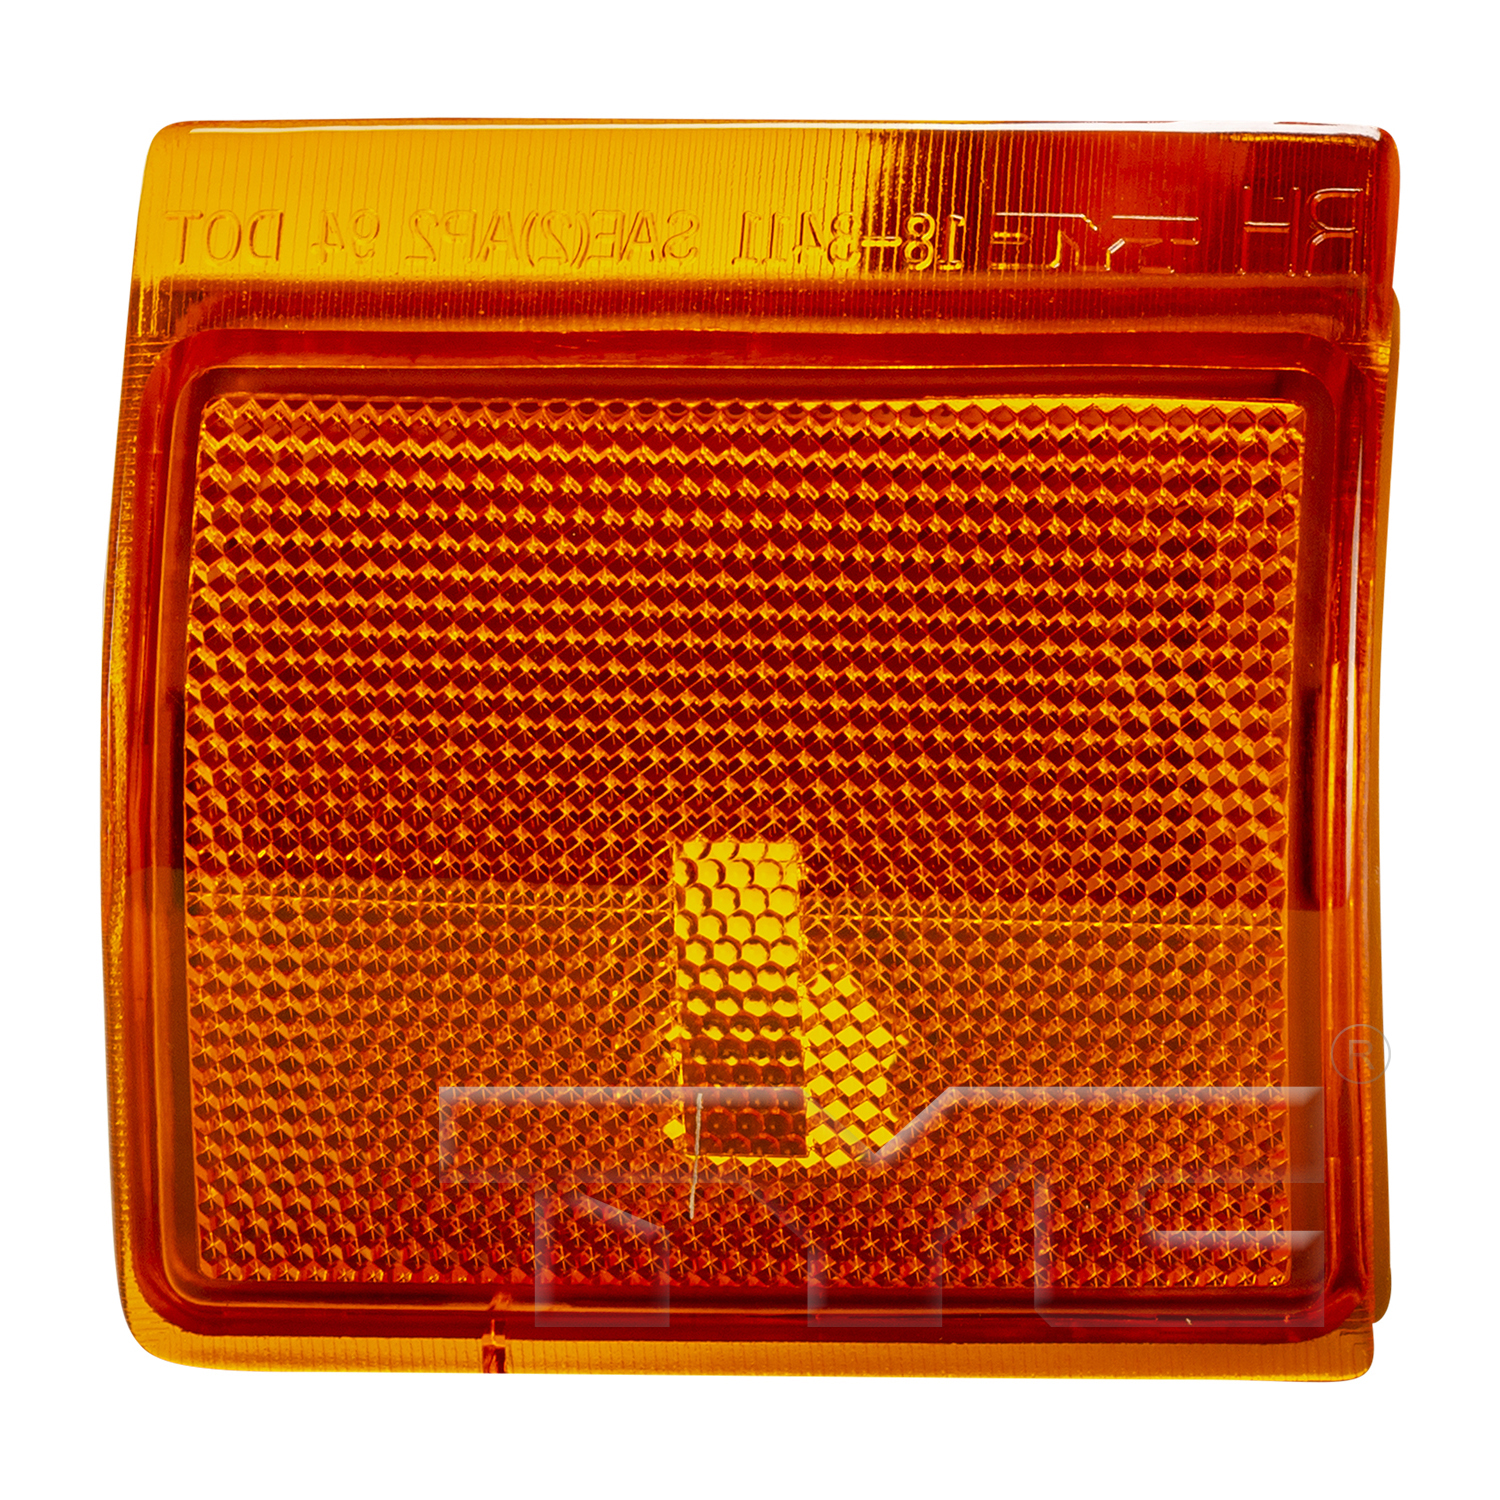 Aftermarket LAMPS for GMC - C2500 SUBURBAN, C2500 SUBURBAN,94-99,LT Front marker lamp assy